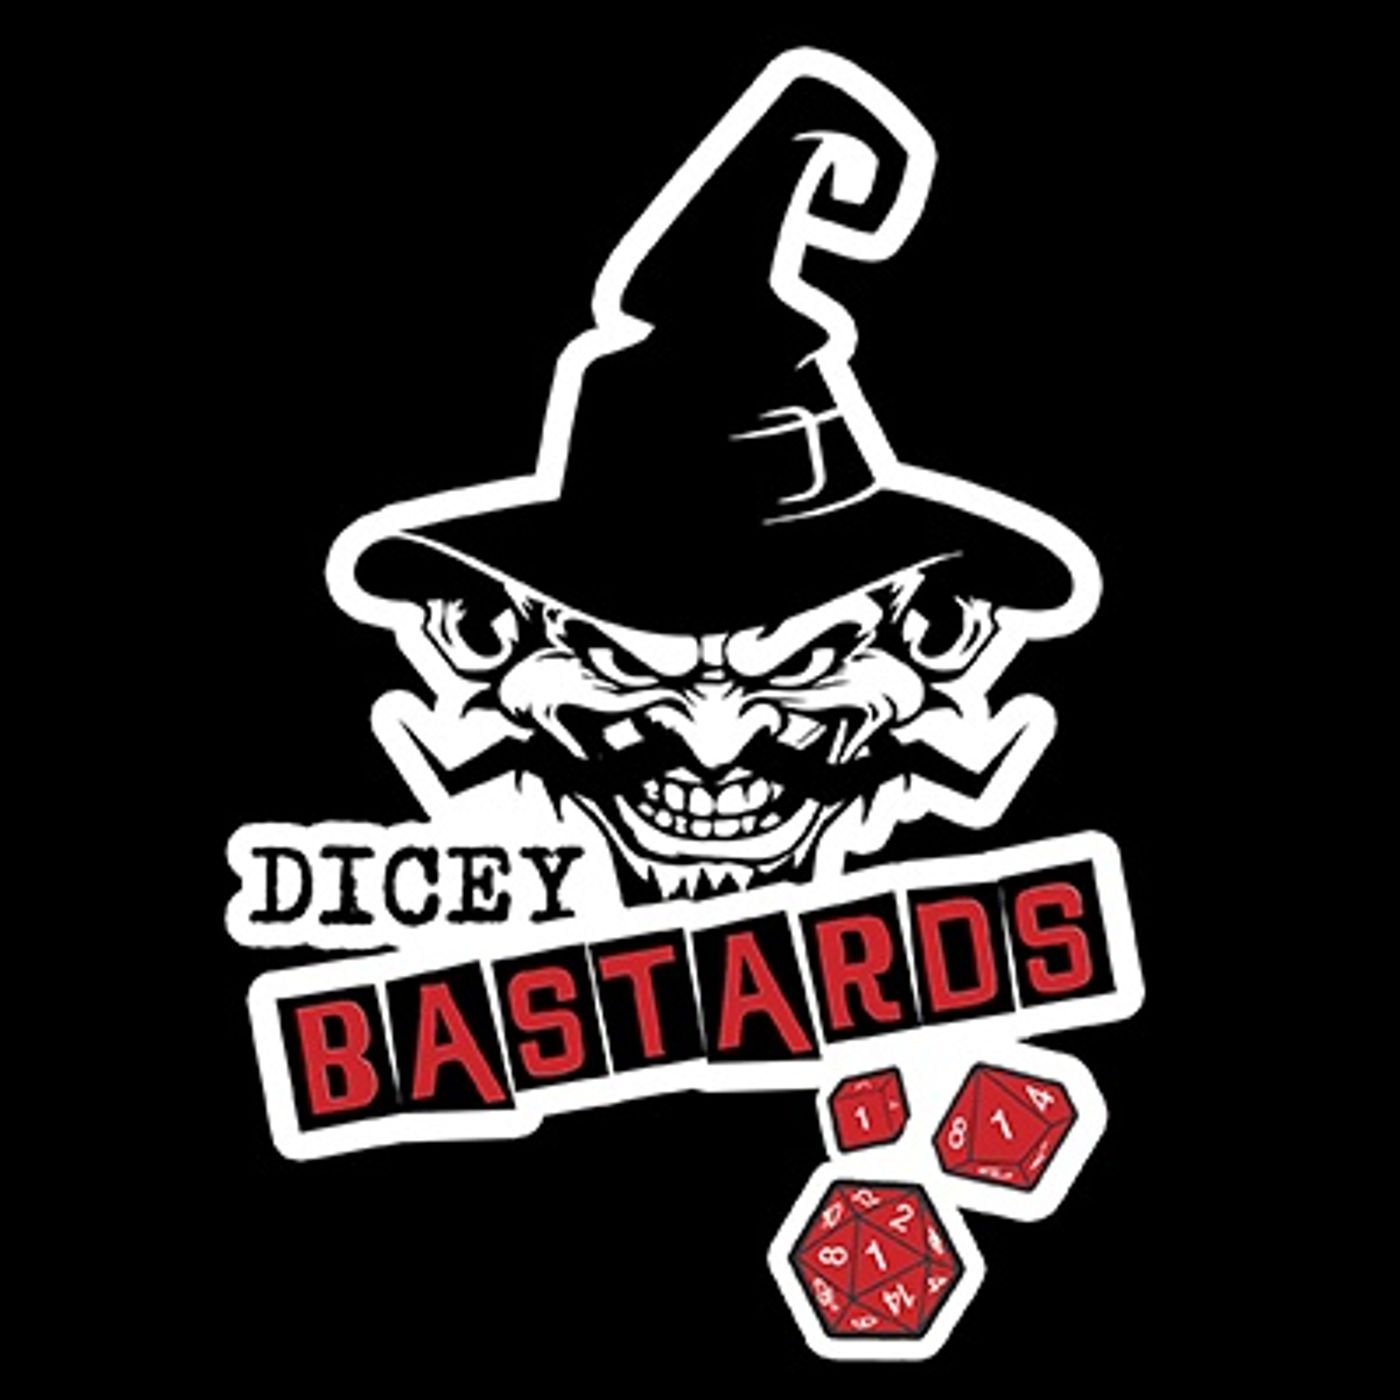 Dicey Bastards Ep.03: An Offer You'd Like to Refuse